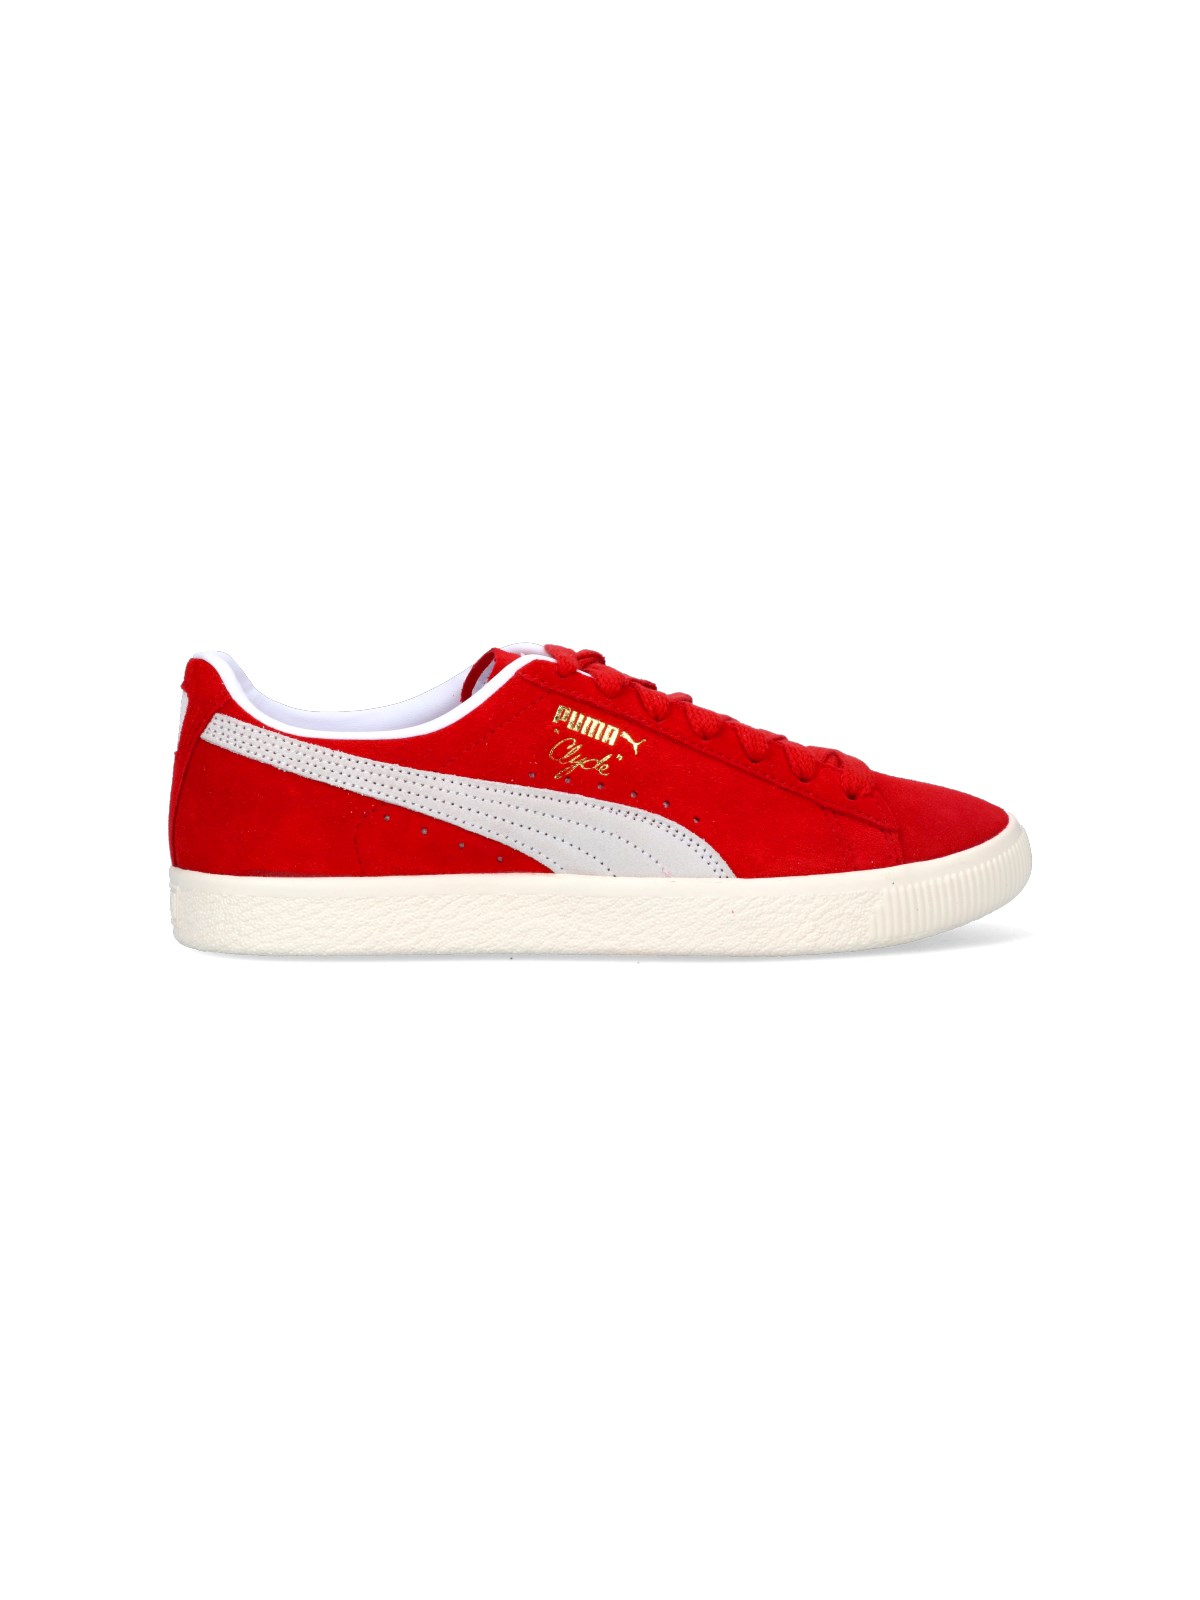 Puma Sneakers In For All Time Red- White-pristine